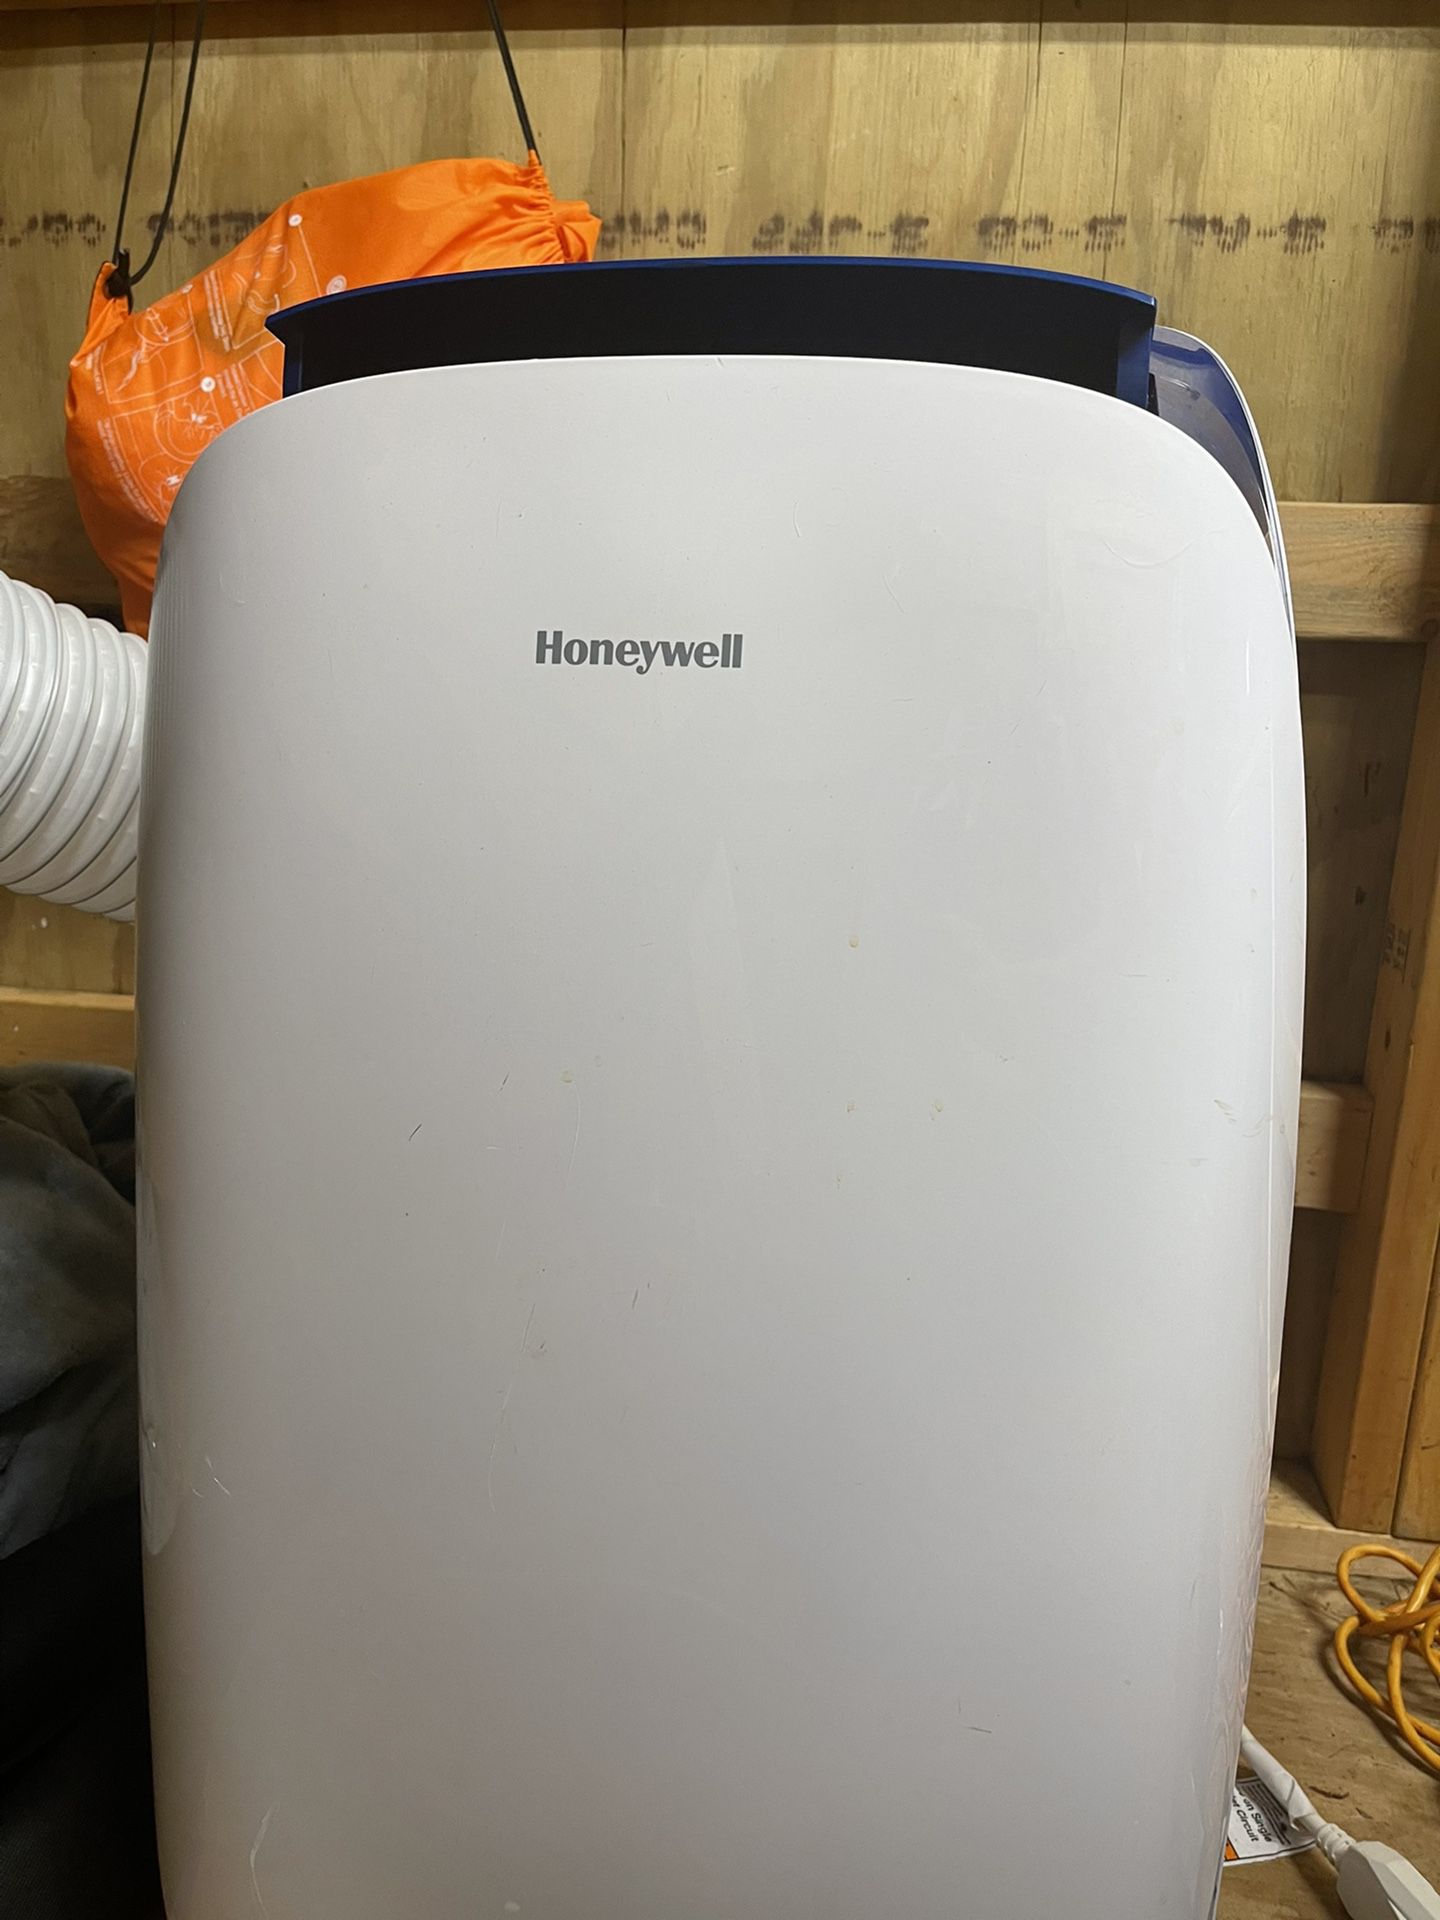 Honeywell Portable Air Conditioner- 6 Months Old